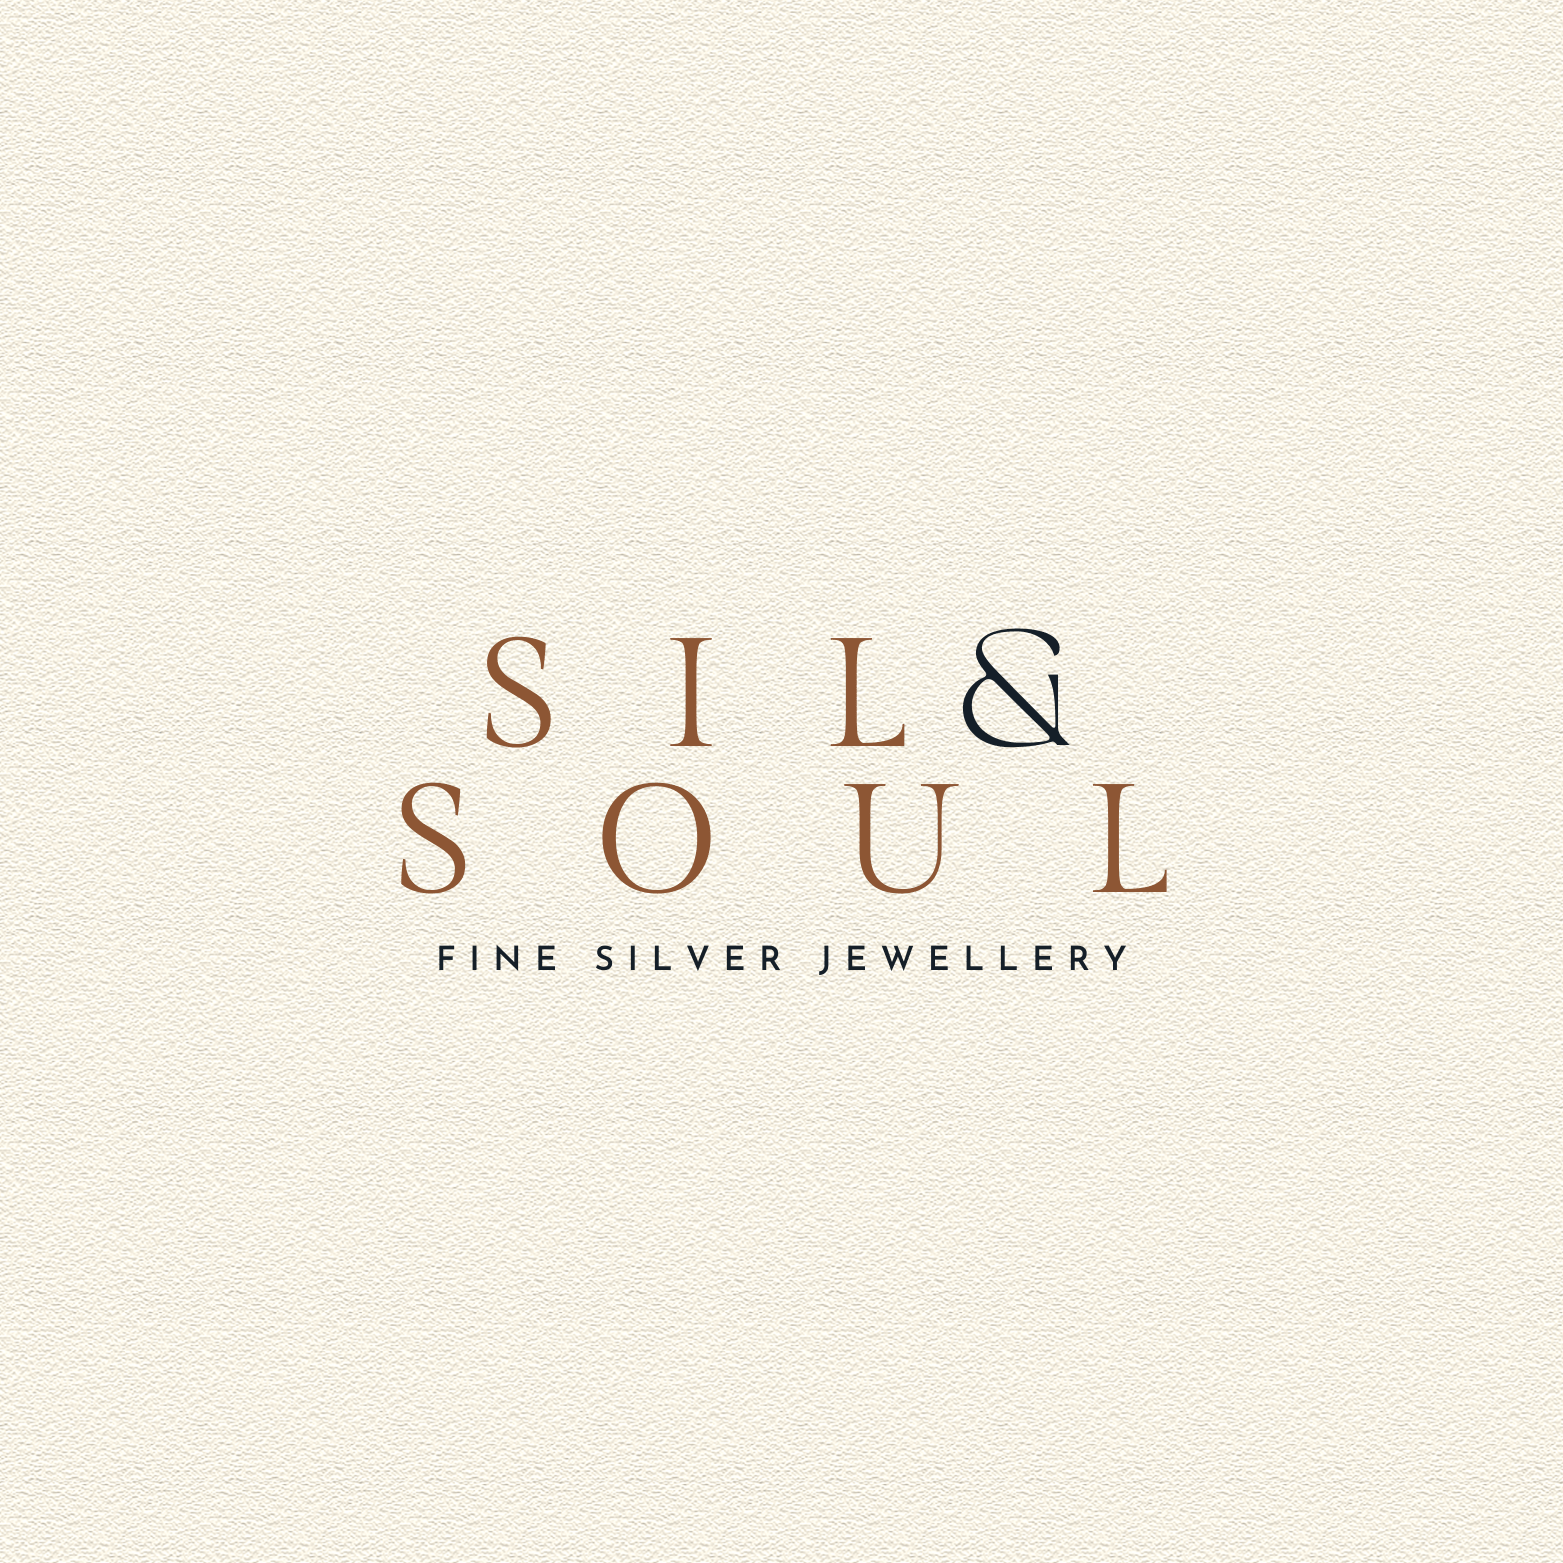 Silnsoul logo depicting the essence of the brand visual